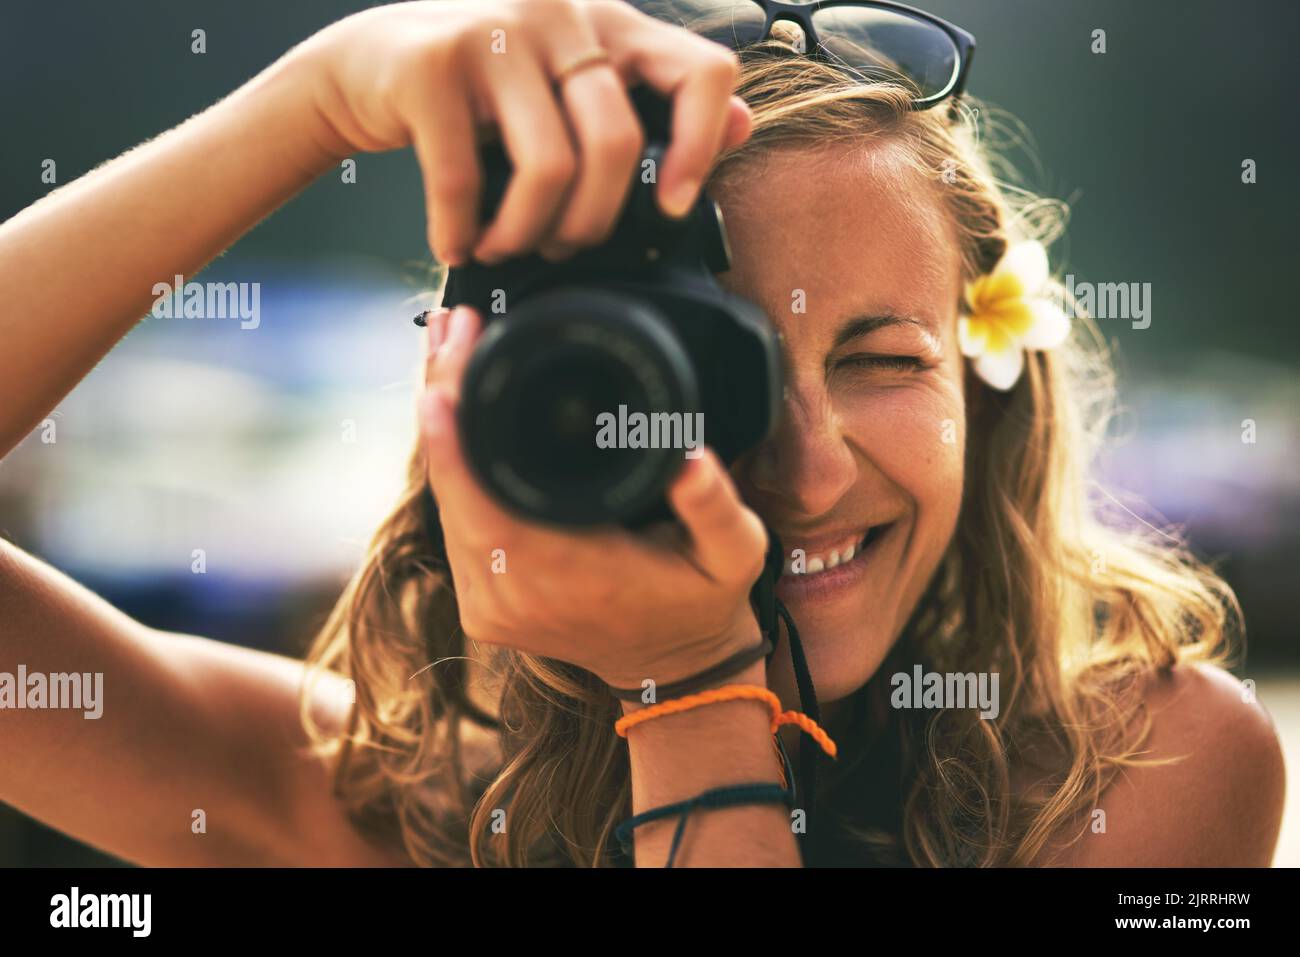 My profession Im a memory collector. Portrait of a young woman taking photos with her camera at the beach. Stock Photo